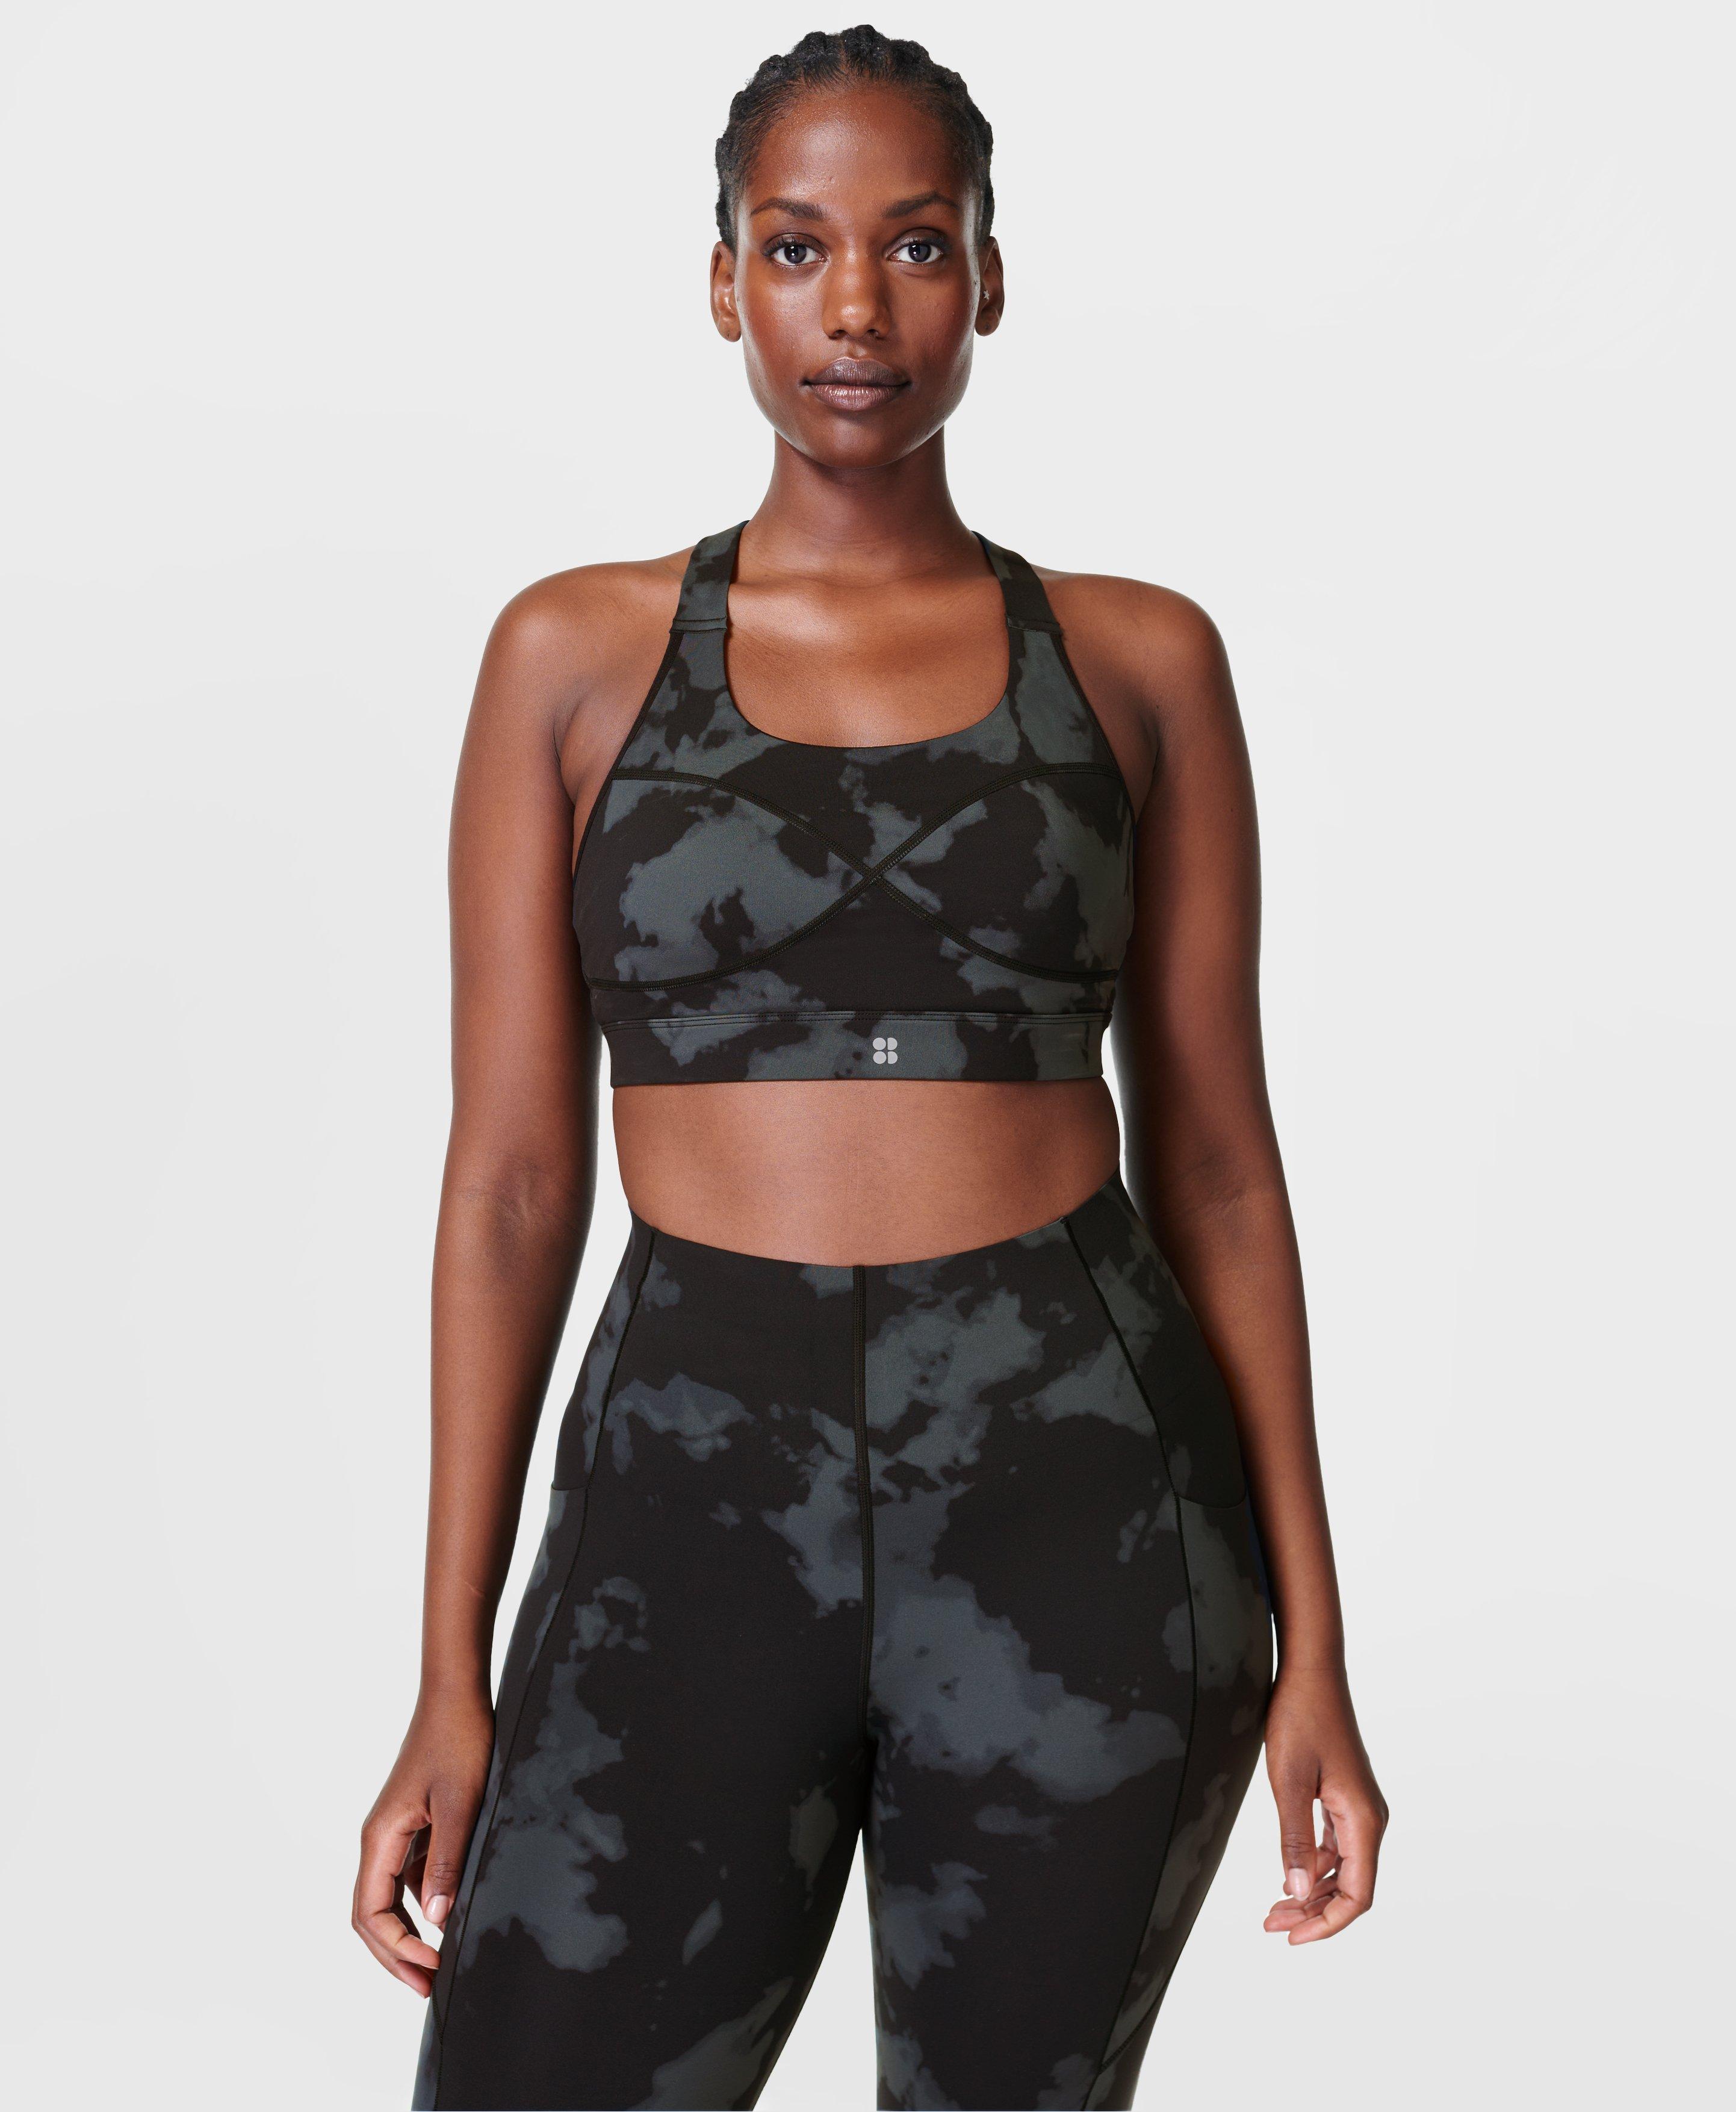 Performance Sports Bra-Black/Gray Camouflage - Outlaw Fitness